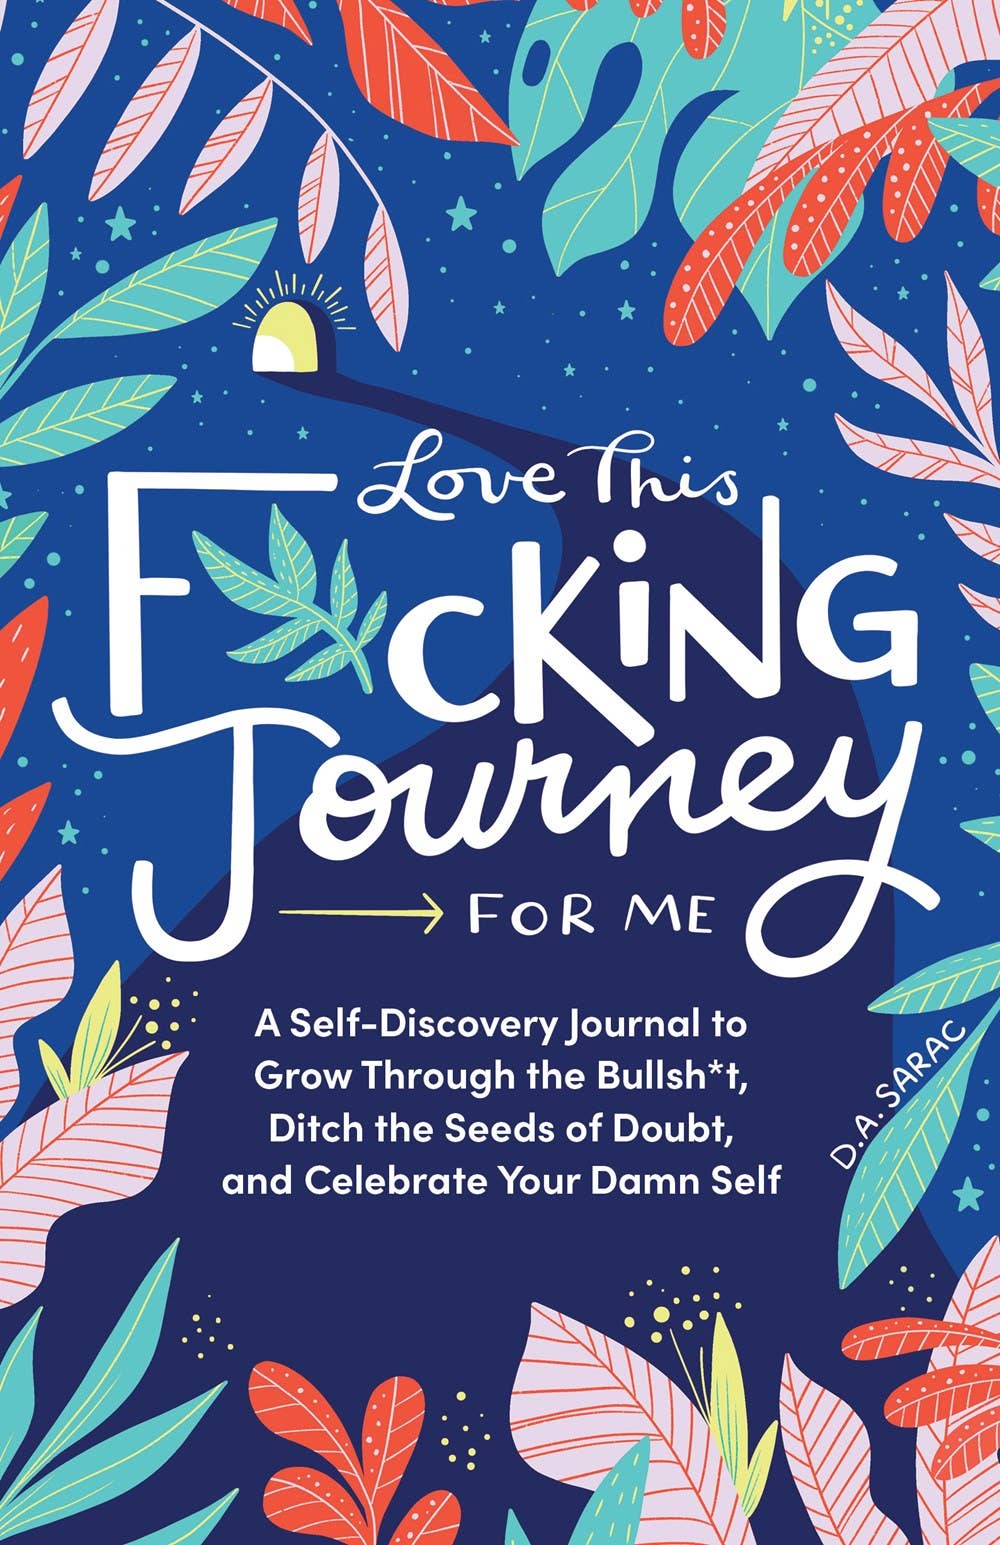 Love This F*cking Journey for Me Journal